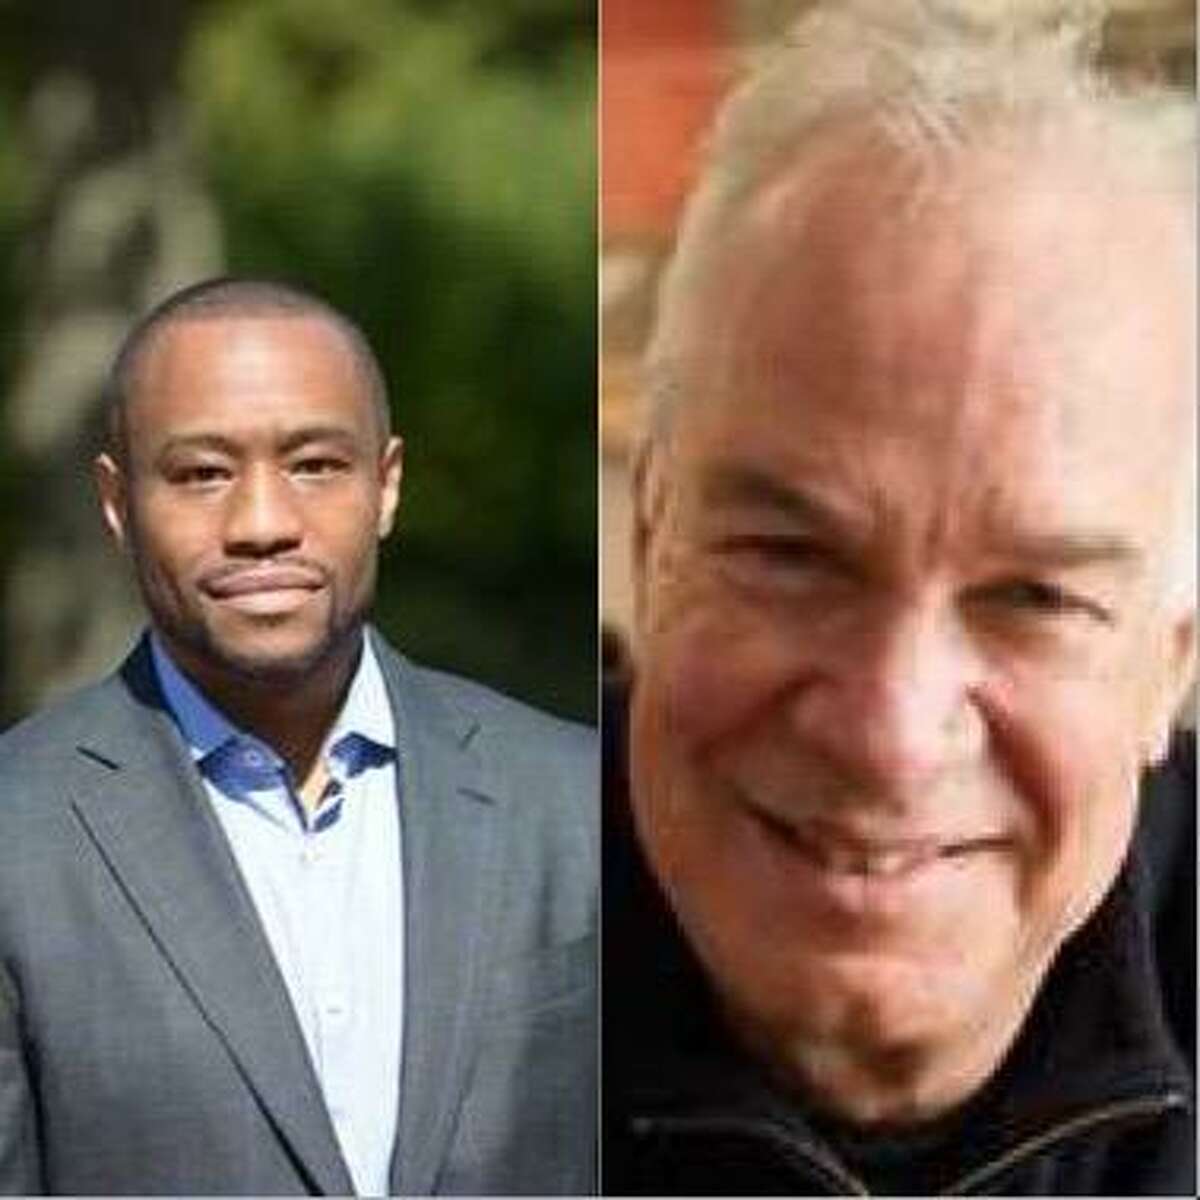 Authors of "Seen and Unseen: Technology, Social Media, and the Fight for Racial Justice" Marc Lamont Hill, left, and Todd Brewster, right.